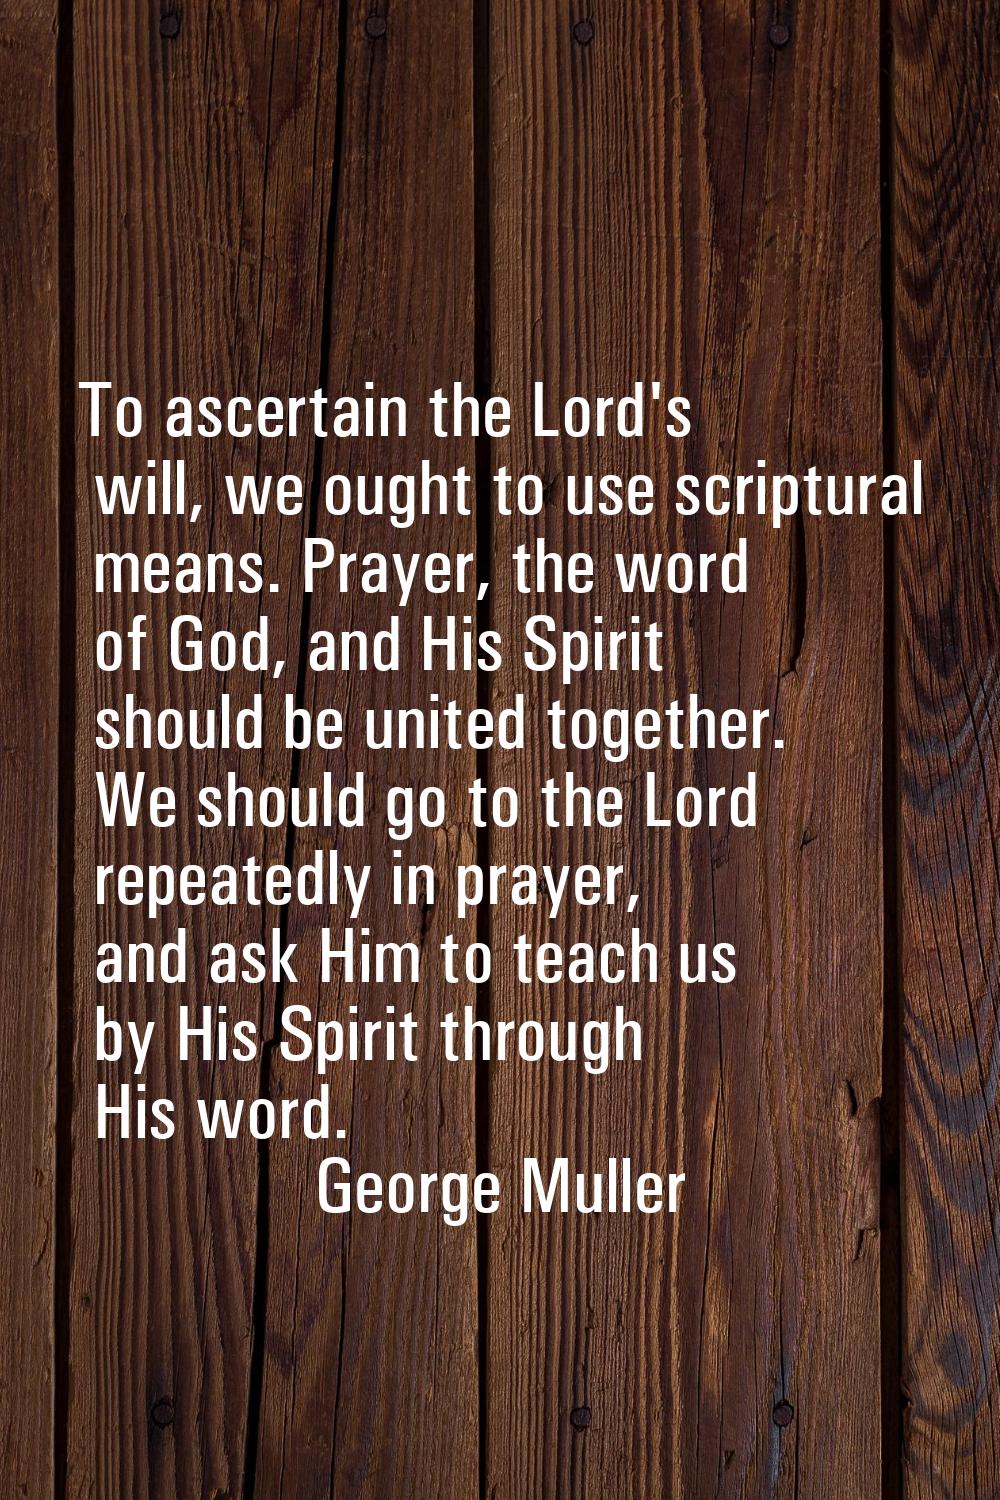 To ascertain the Lord's will, we ought to use scriptural means. Prayer, the word of God, and His Sp